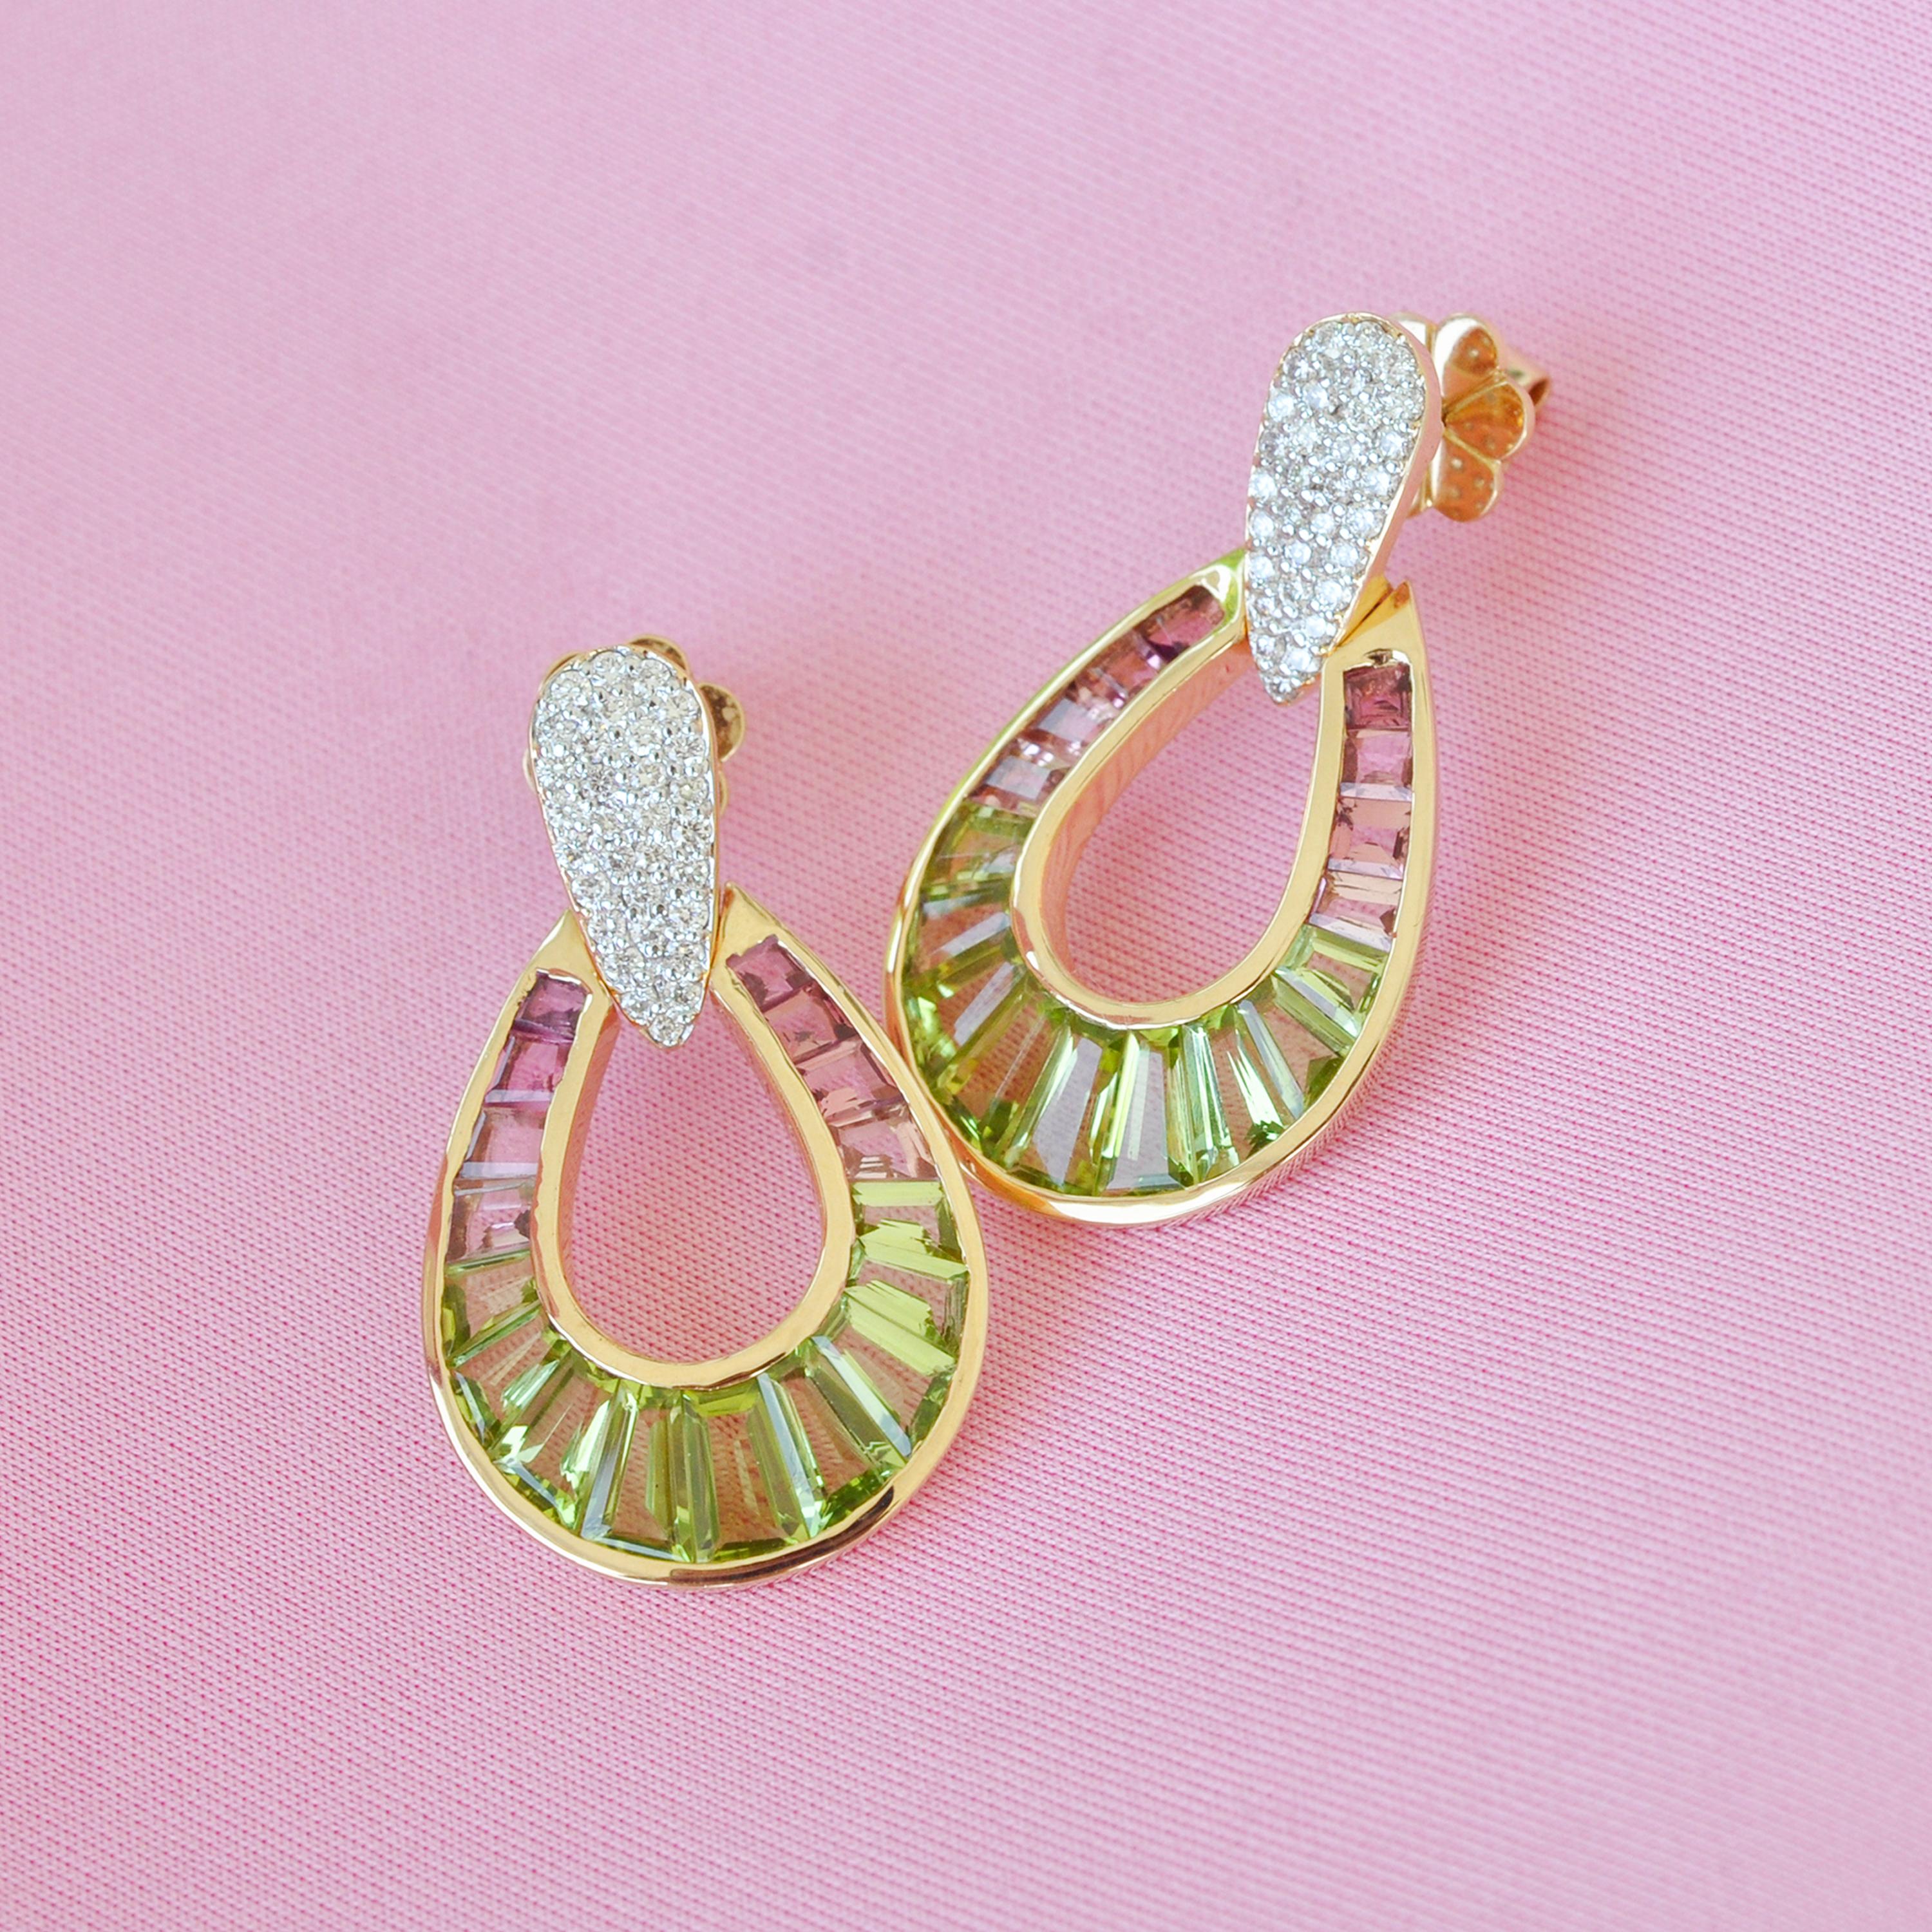 Absolutely stunning, these peridot pink tourmaline dangle drop earrings are set in 18 karat gold using best international alloys. The perfectly crafted tear drop or as some people call it raindrop earrings are made with a lot of work by the experts